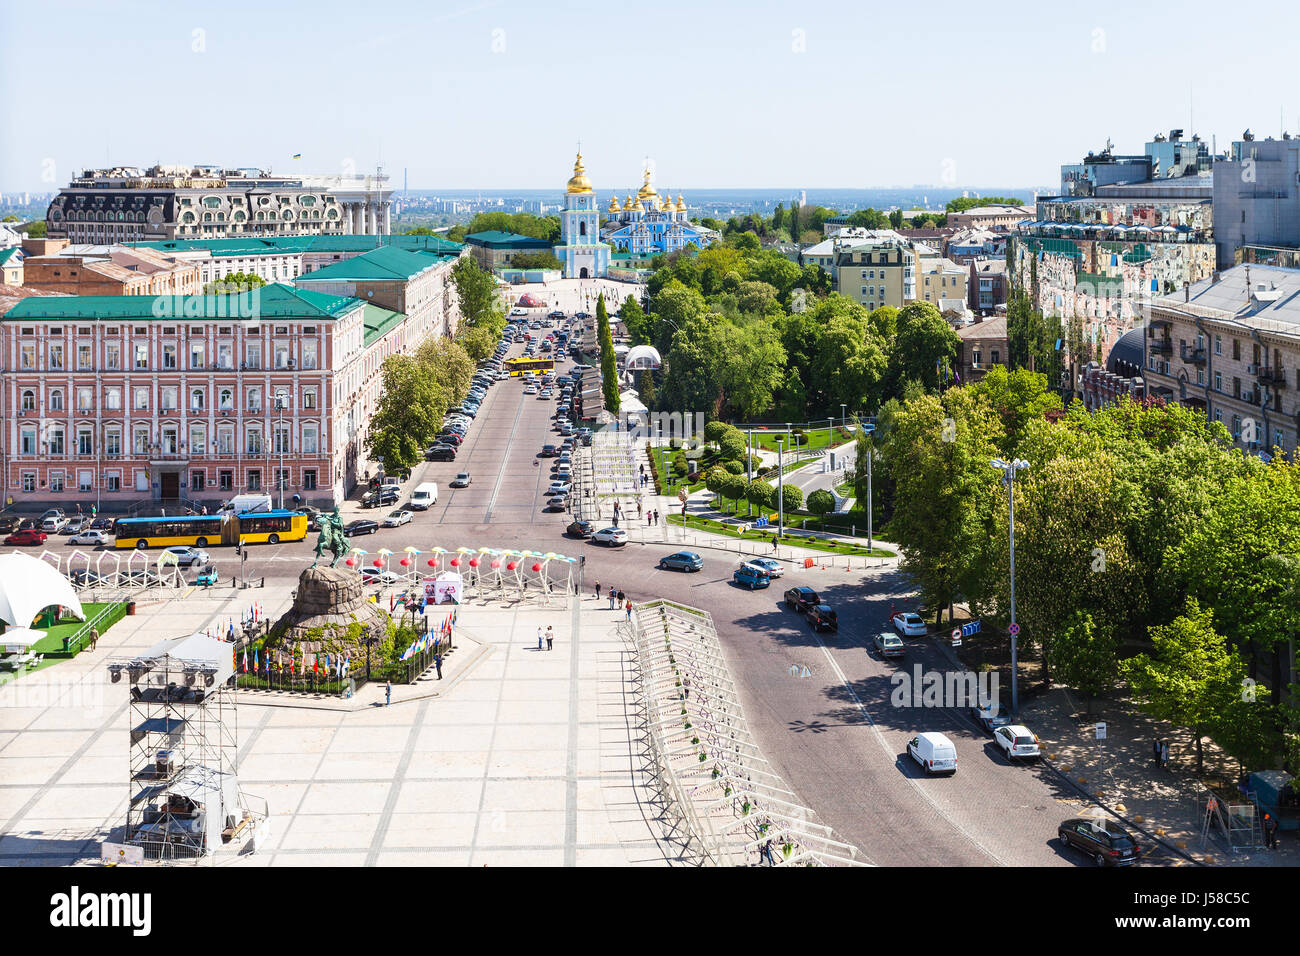 KIEV, UKRAINE - MAY 5, 2017: above view of people and monument of Bohdan Khmelnytsky on St Sophia Square and Saint Michael's Golden-Domed Monastery in Stock Photo